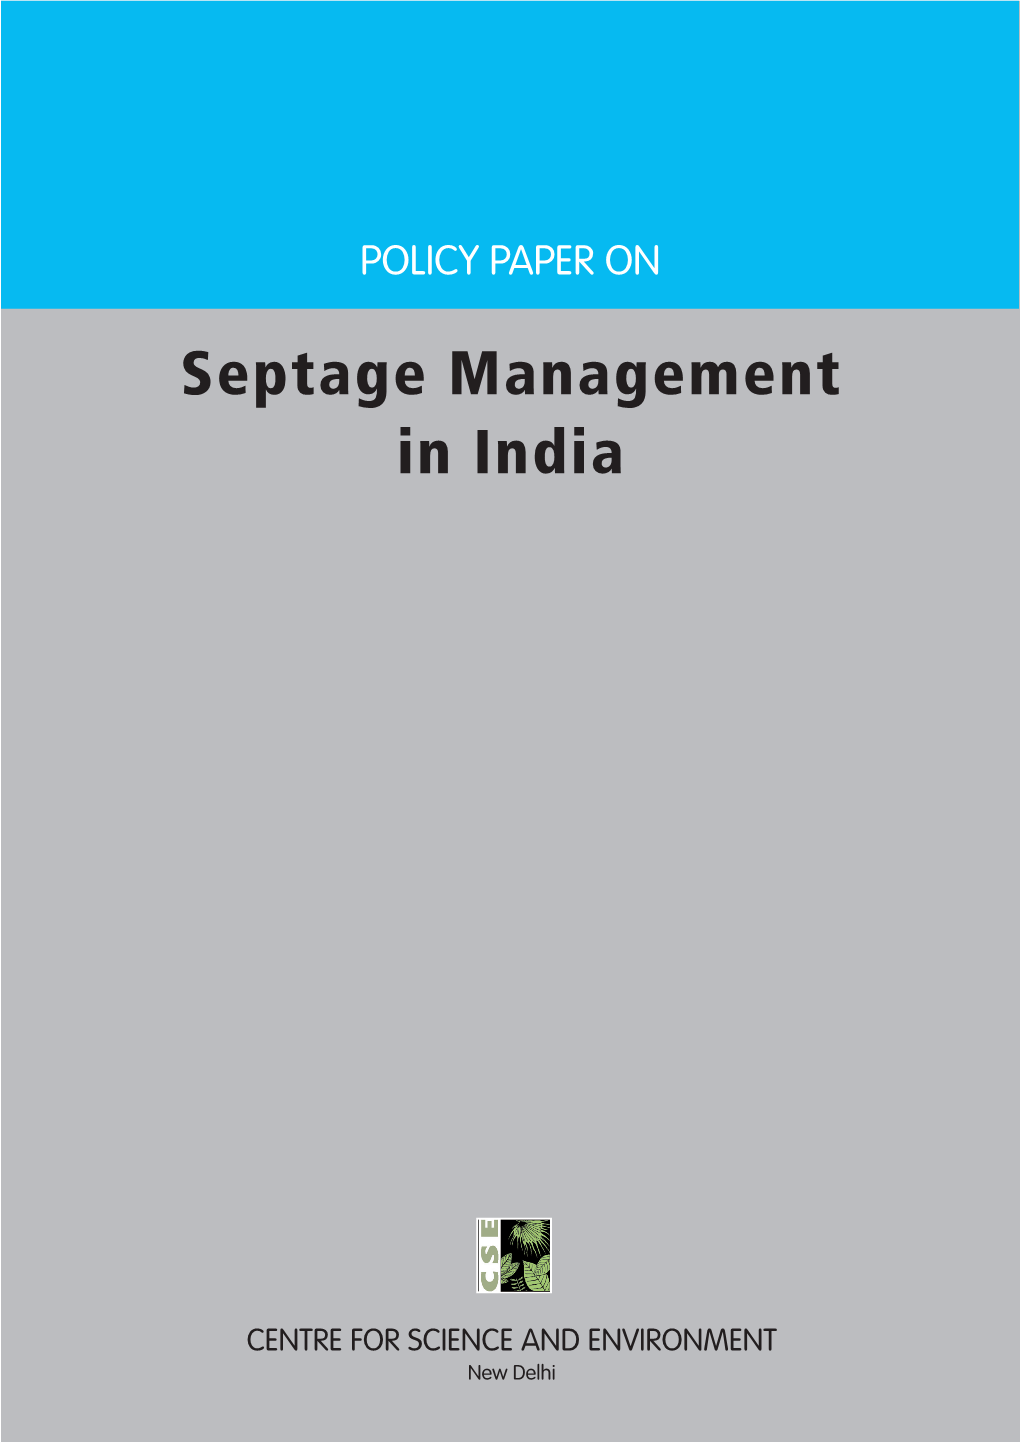 Policy Paper on Septage Management in India